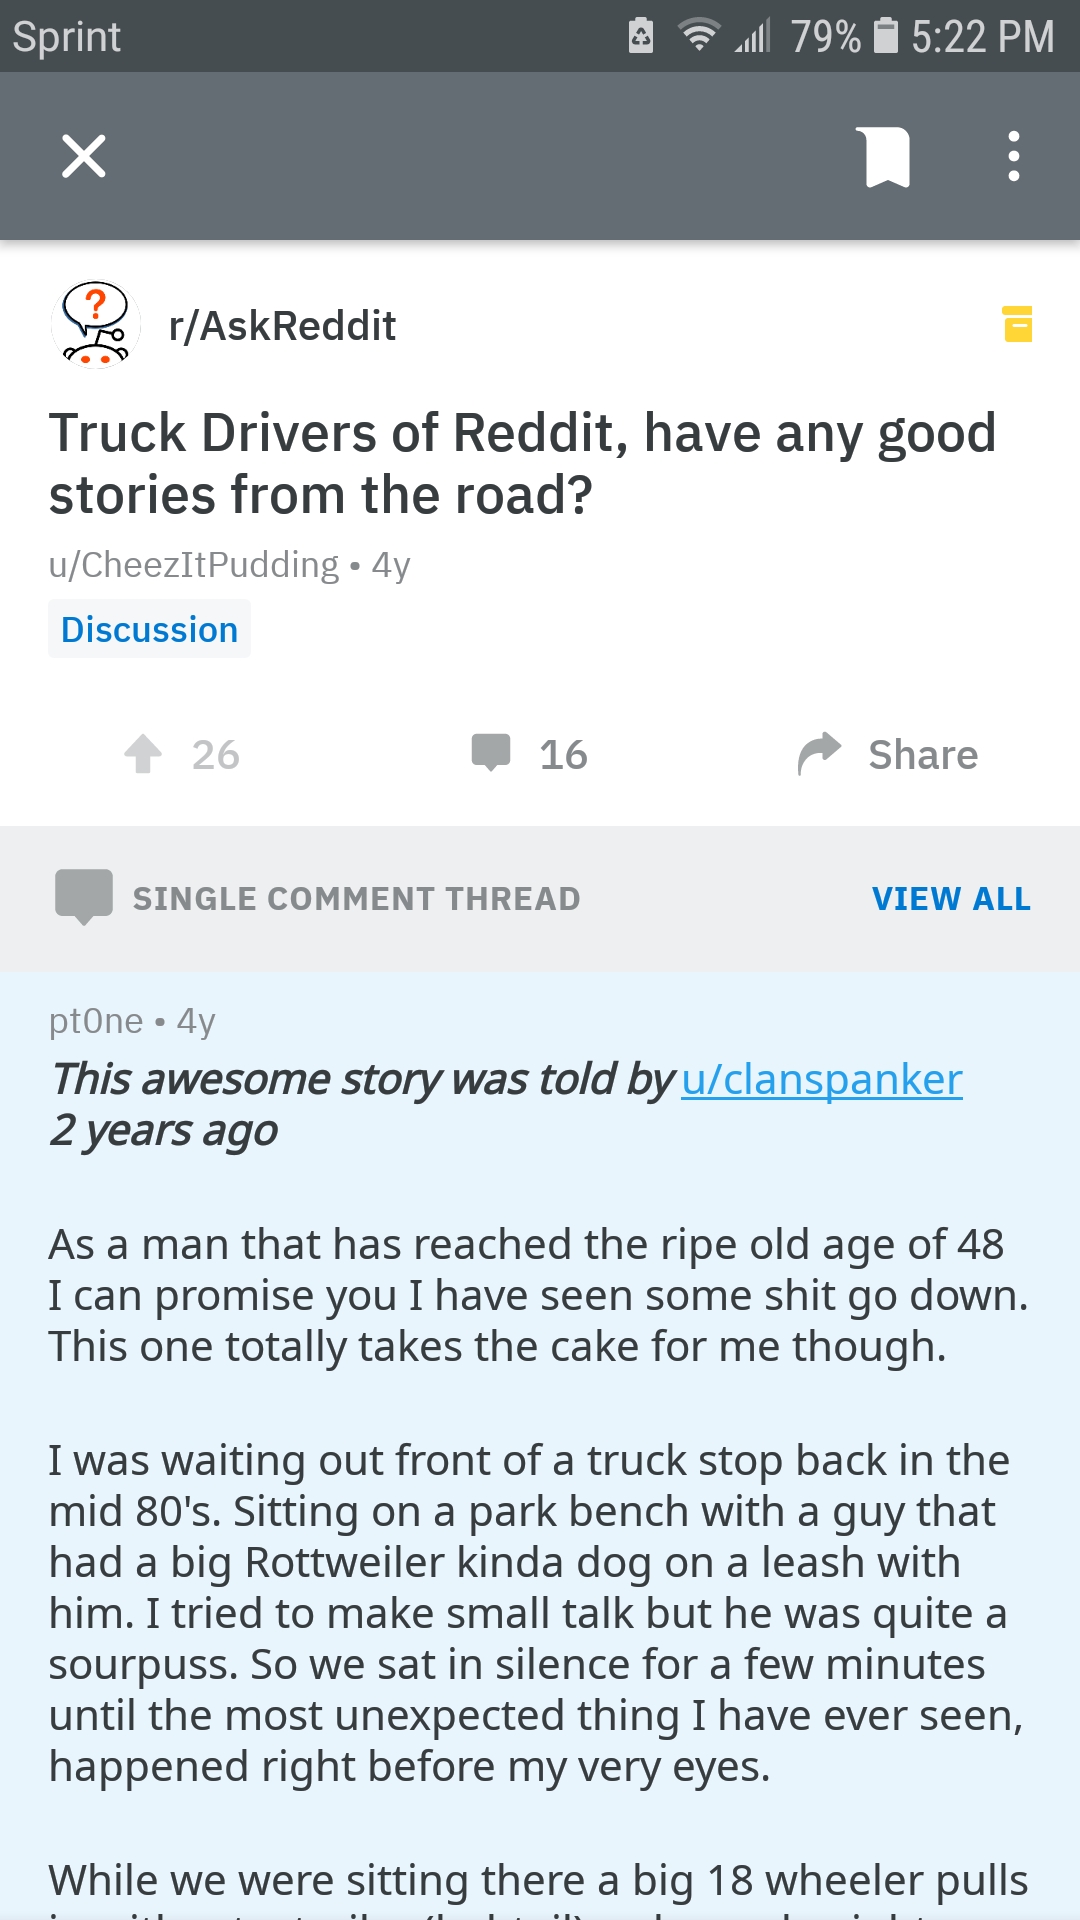 web page - 2 79% Sprint AskReddit Truck Drivers of Reddit, have any good stories from the road? Cheez tPudding 4y Discussion 26 16 Single Comment Thread View All ptOne. 4y This awesome story was told by uclanspanker 2 years ago As a man that has reached t